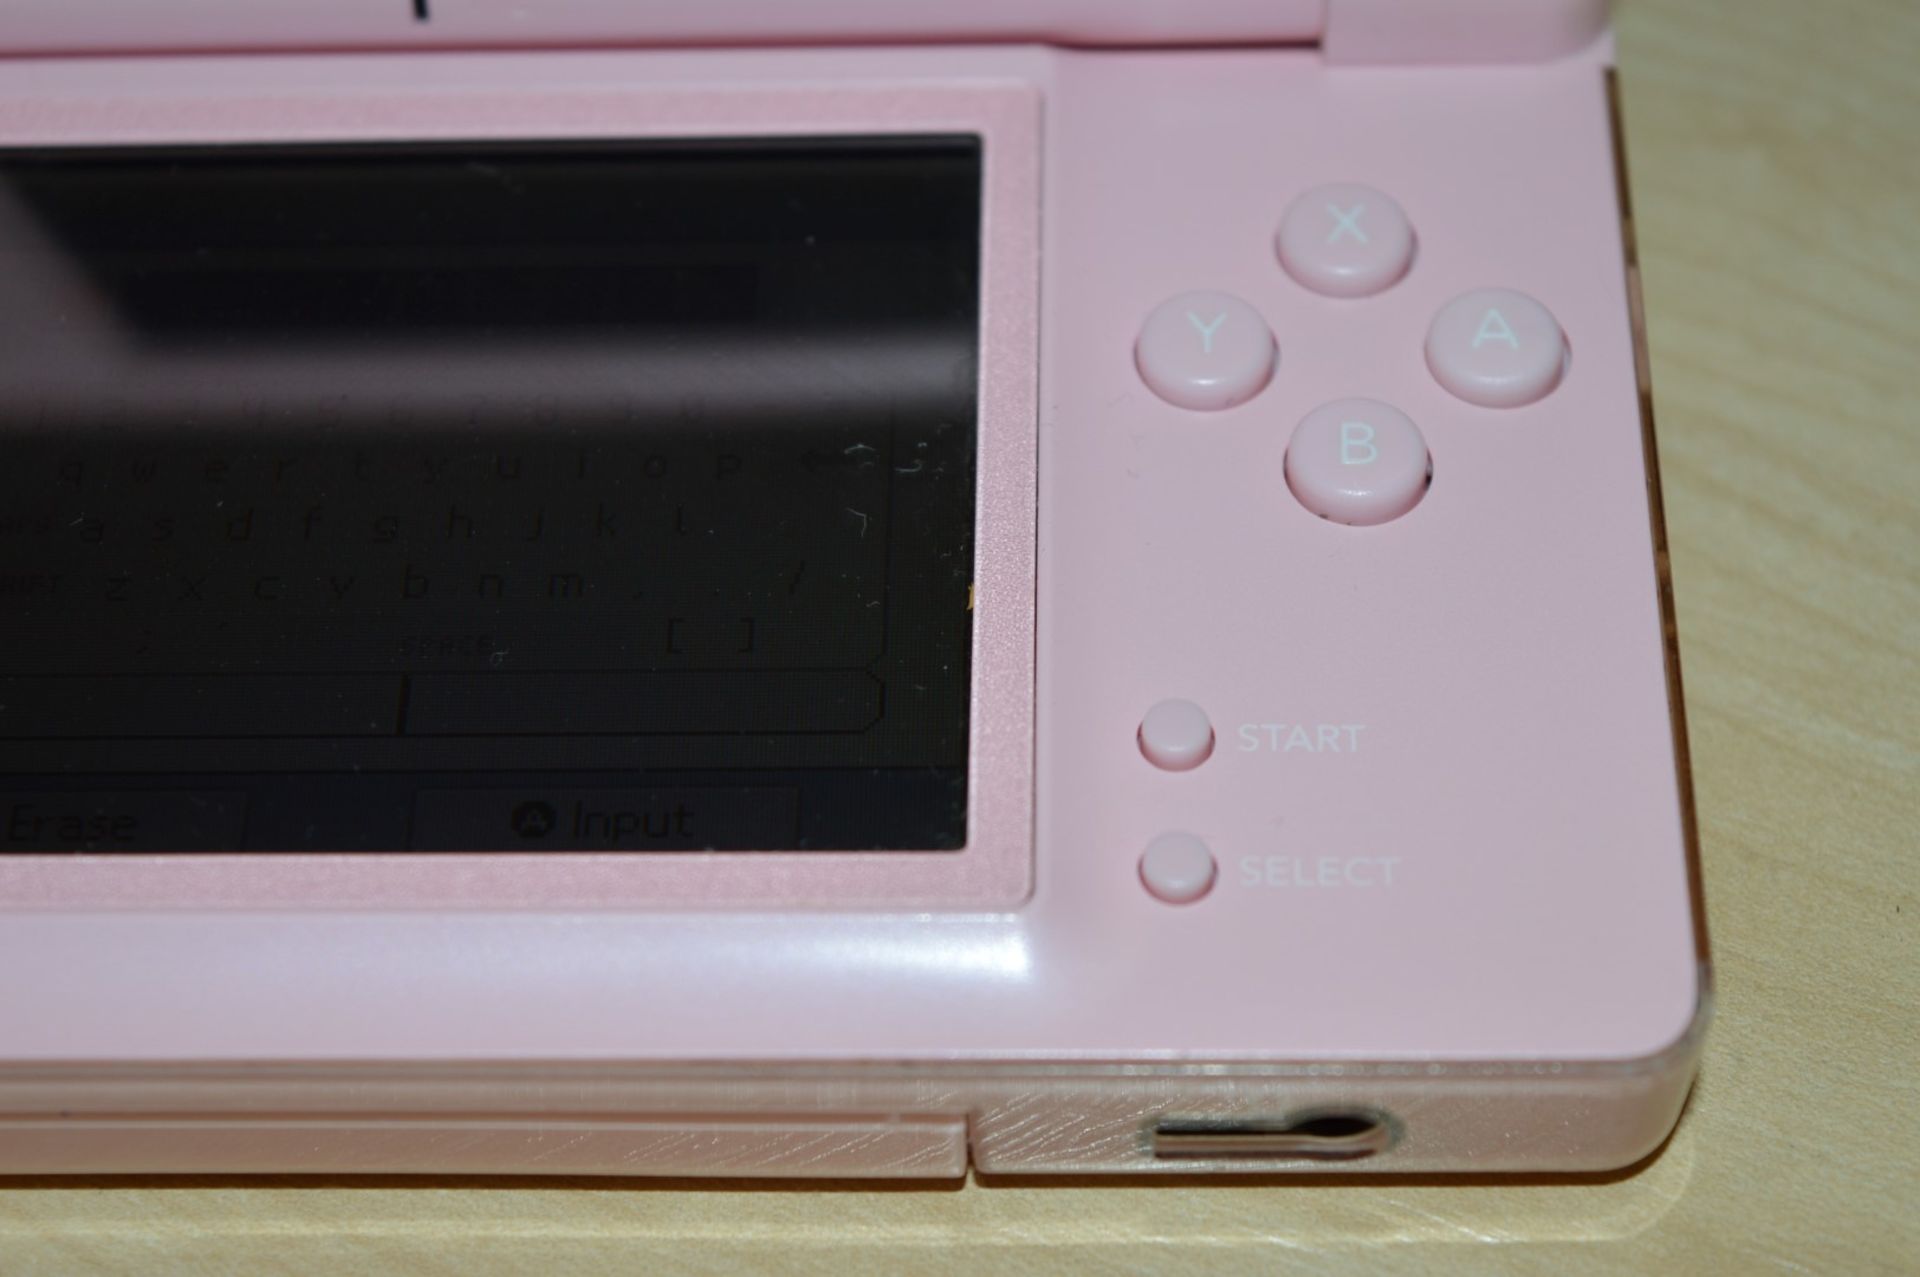 1 x Pink Nintendo DS Lite With High School Musical 2 Game - Includes Touch Pen and Charger - Good - Image 6 of 8